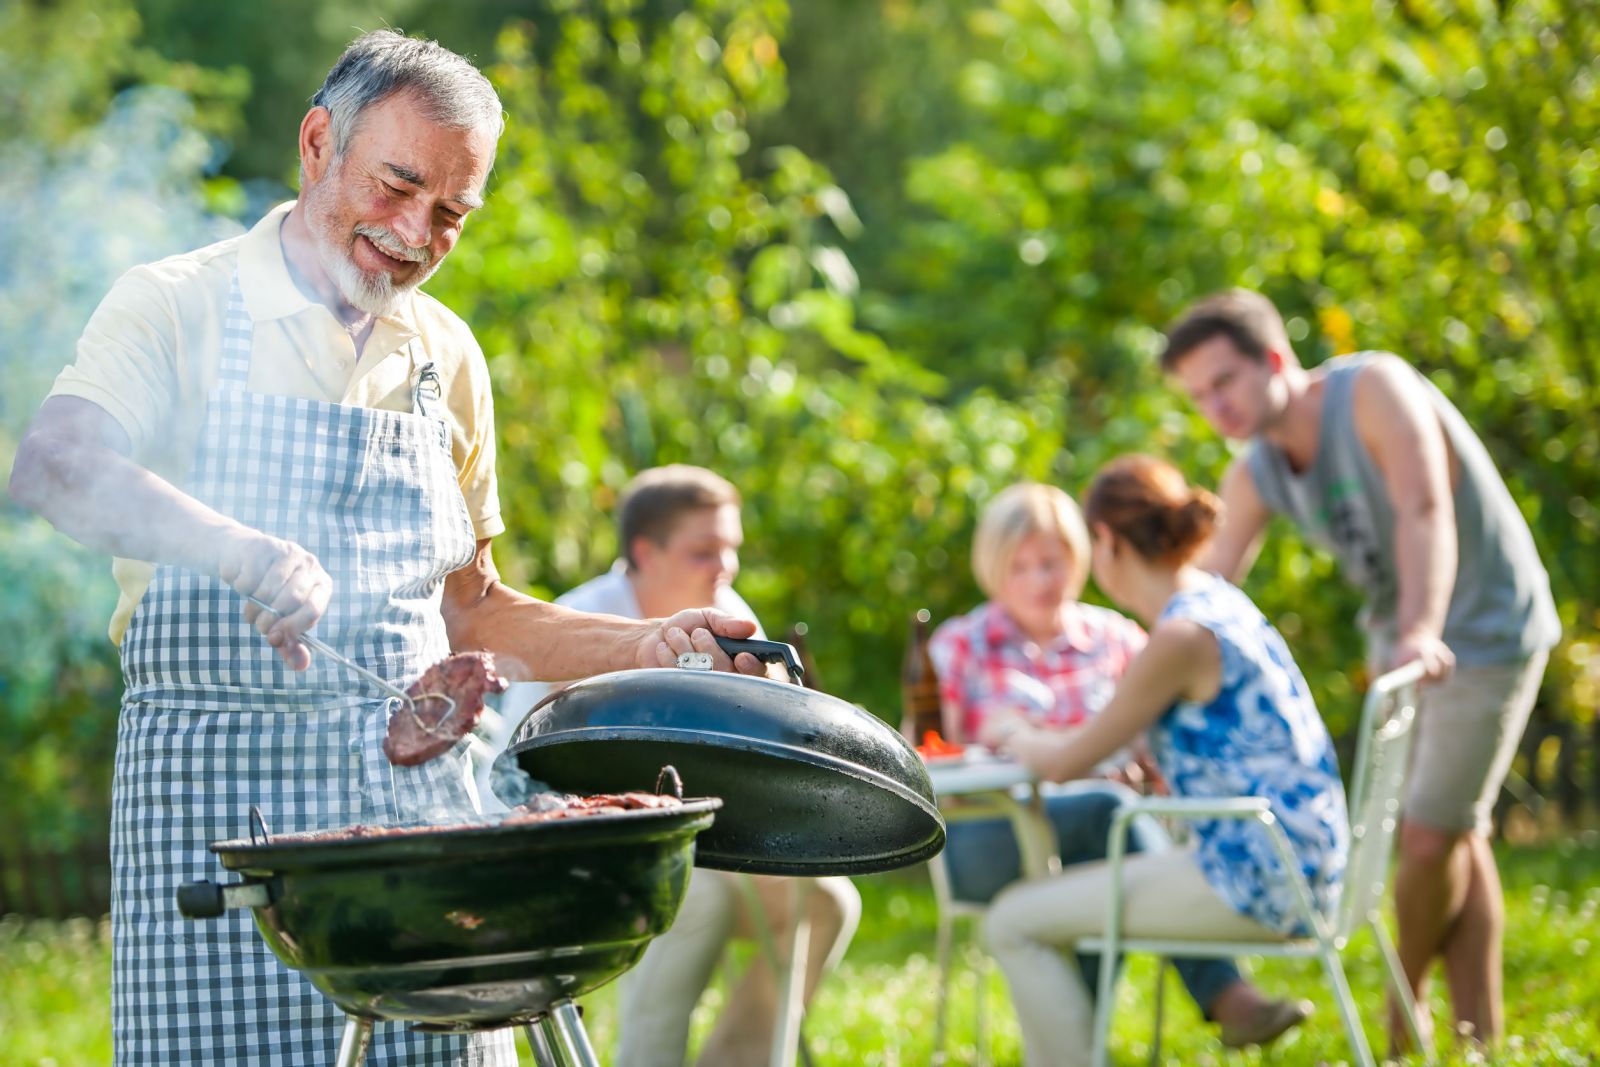 Make The Most Of Your Nearest Public BBQ